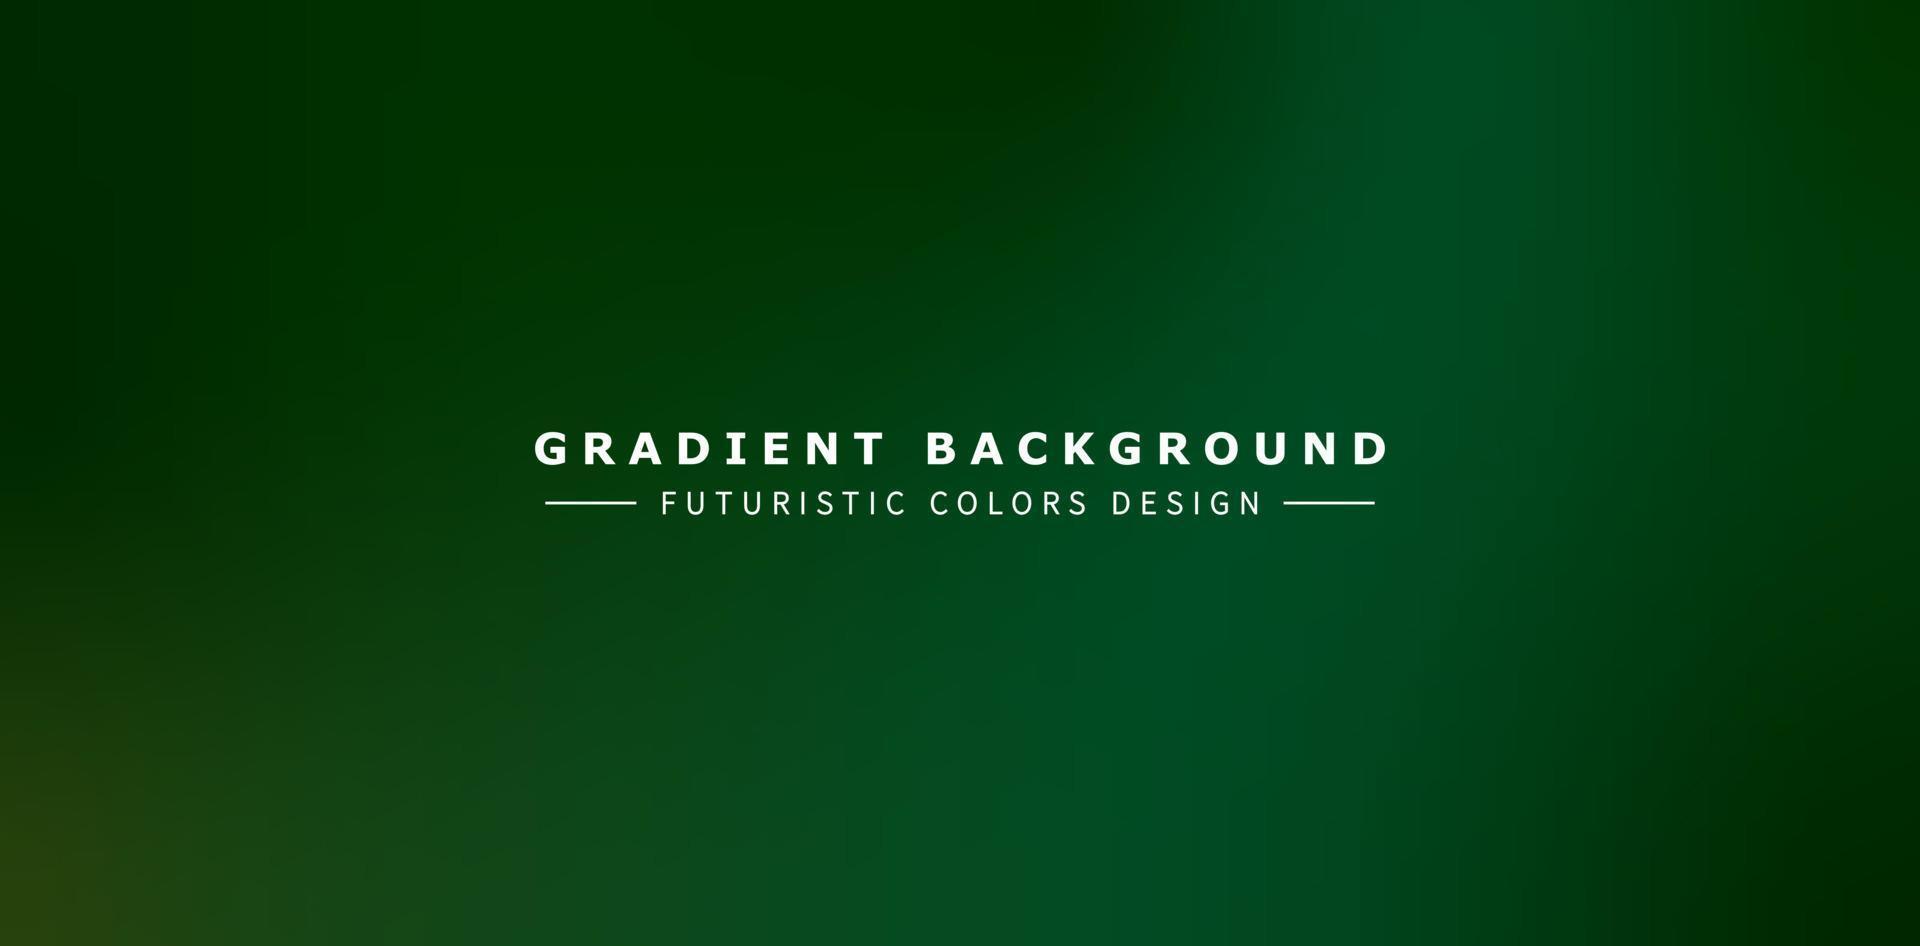 abstract background with dark green gradient colors, applicable for website banner, poster sign corporate, social media template business, advertising agency billboard, garden nature background models vector